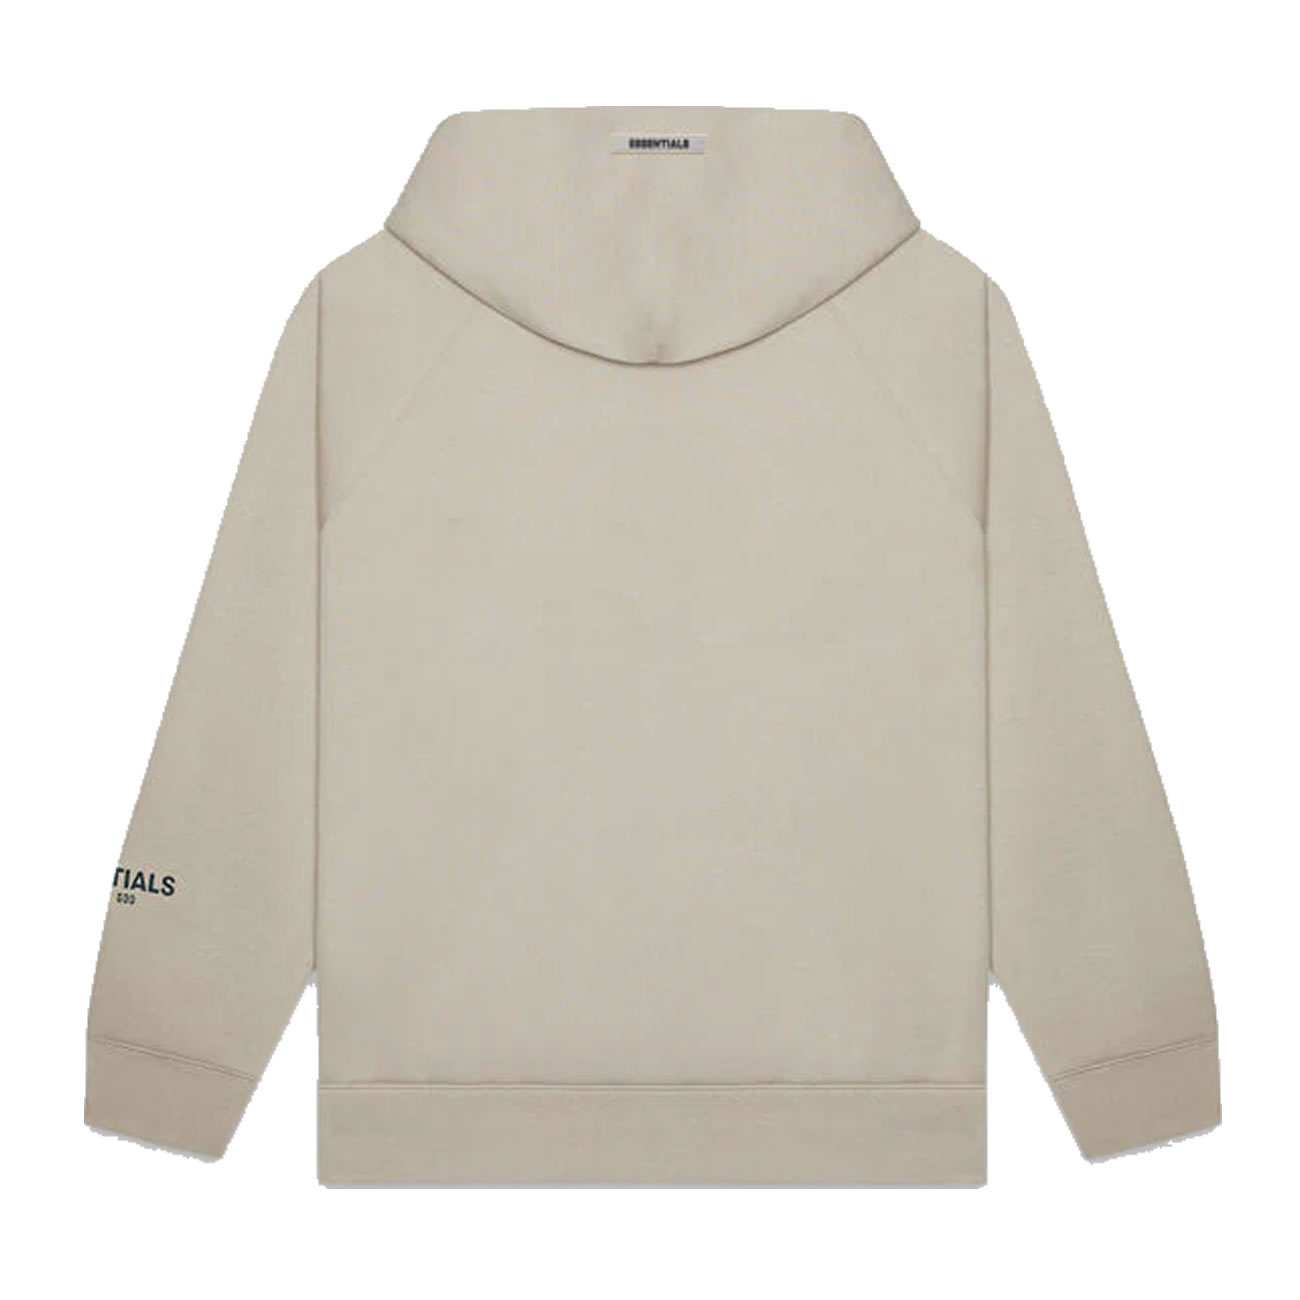 Fear Of God Essentials Pullover Hoodie Applique Logo Ss20 (10) - newkick.org